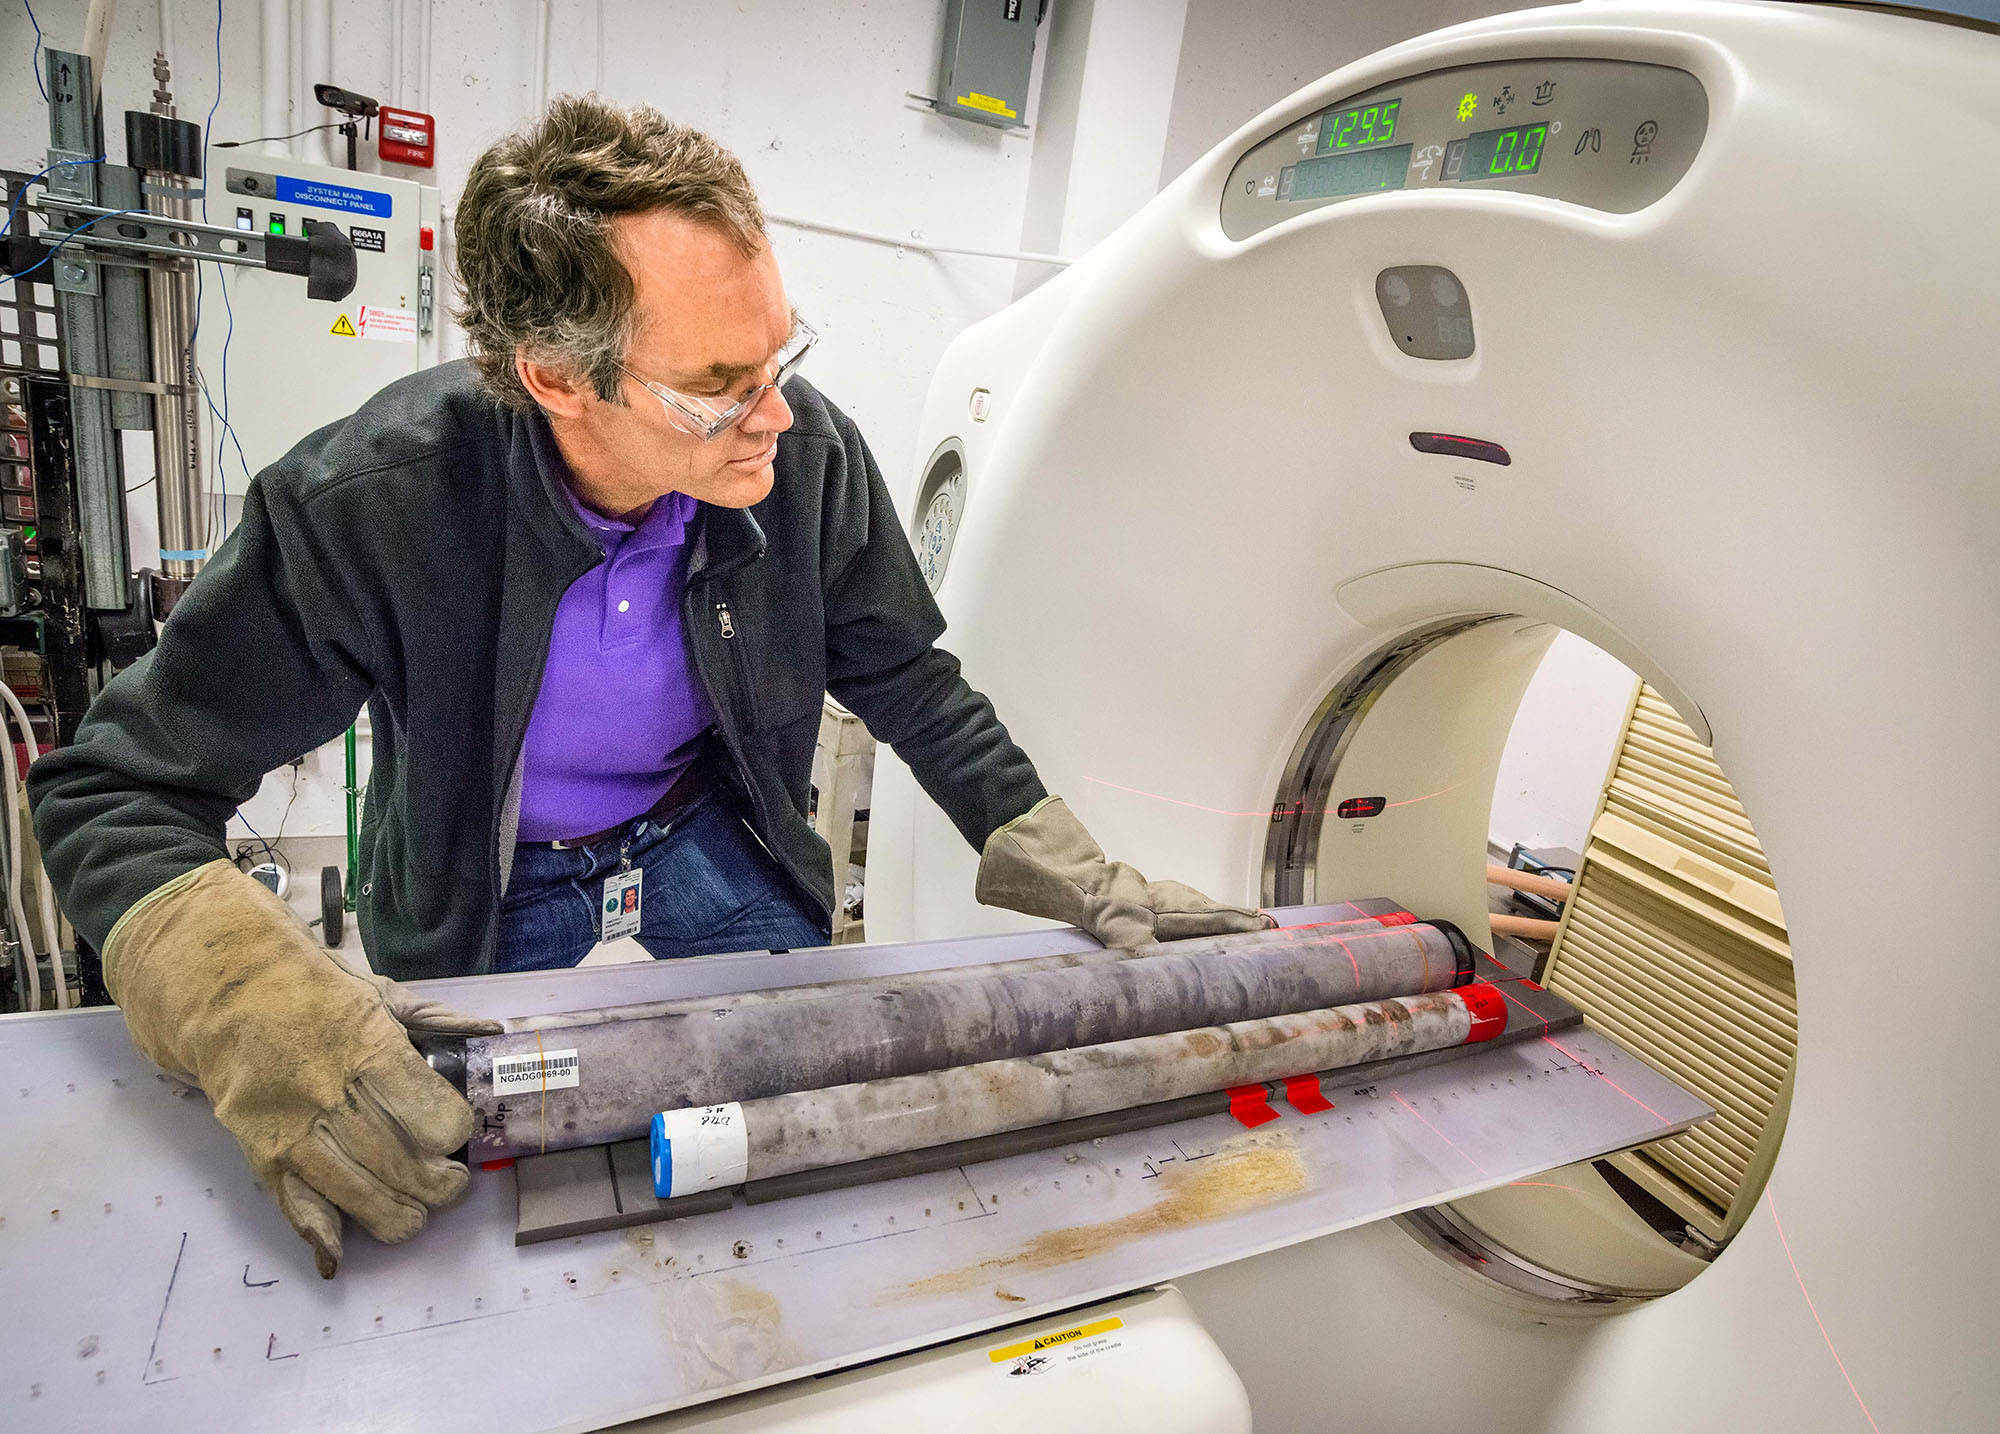 Scientist scanning a soil core in a CT scanner.